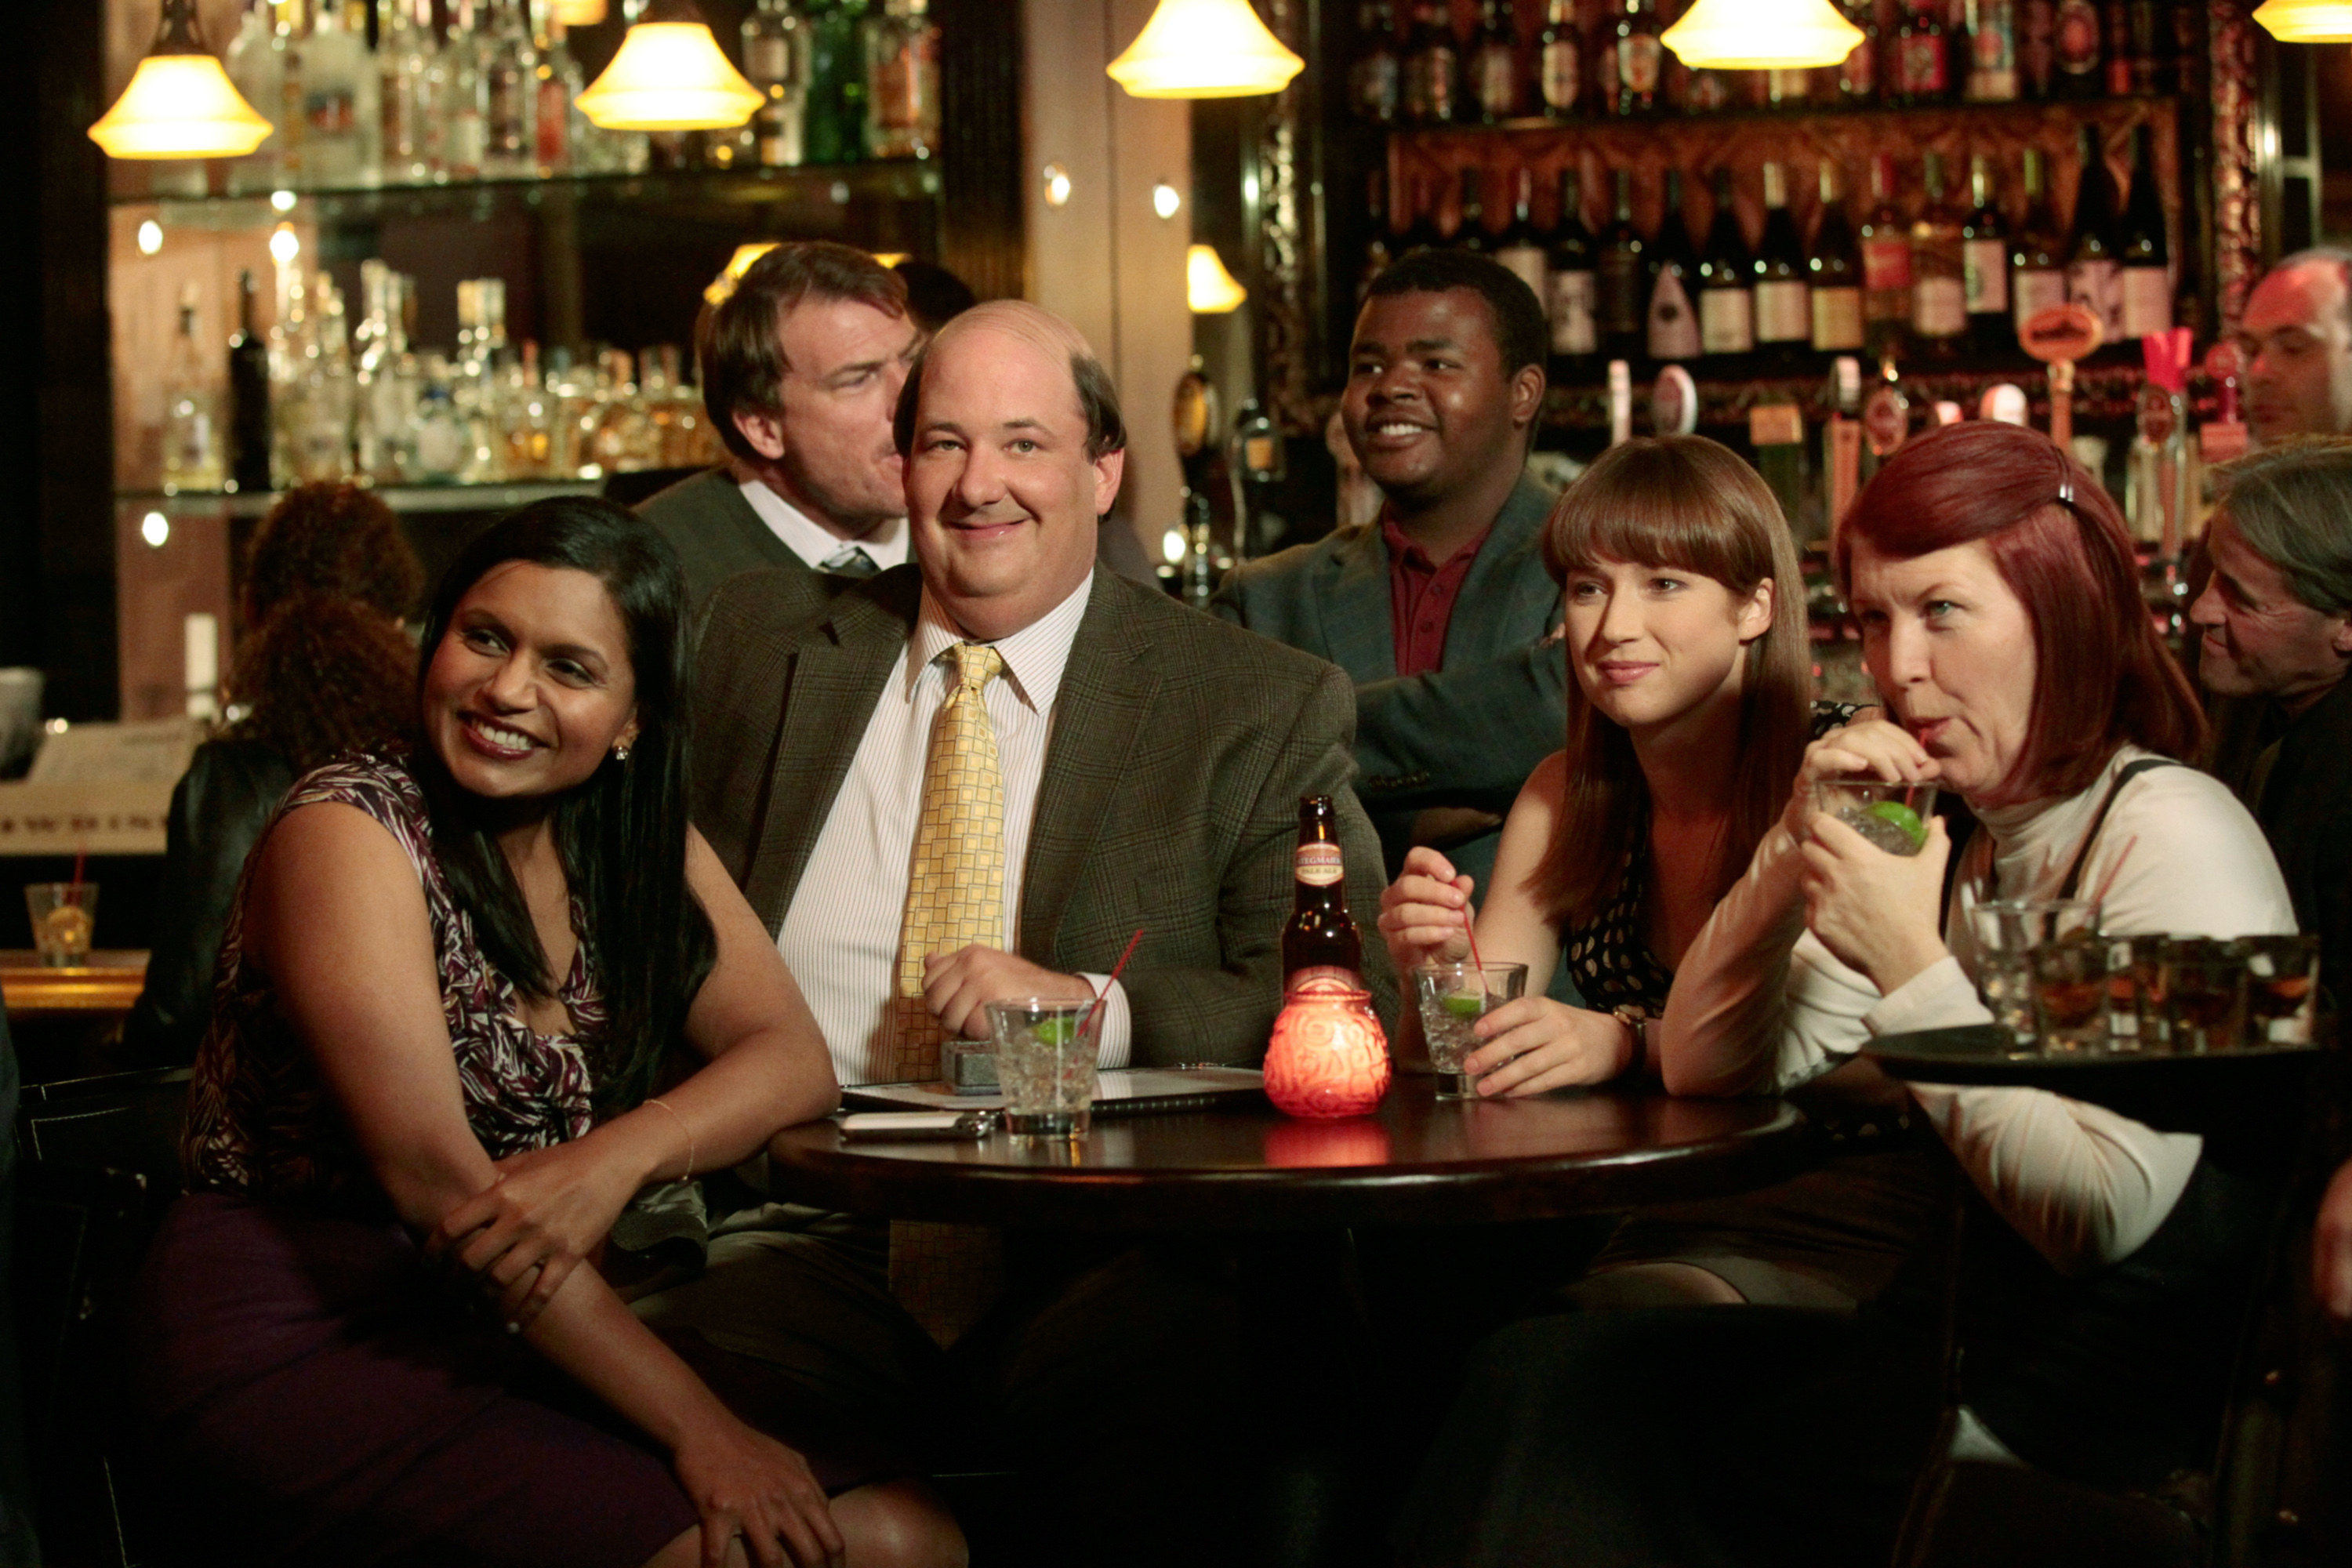 Mindy and some of her Office co-stars sit in a bar